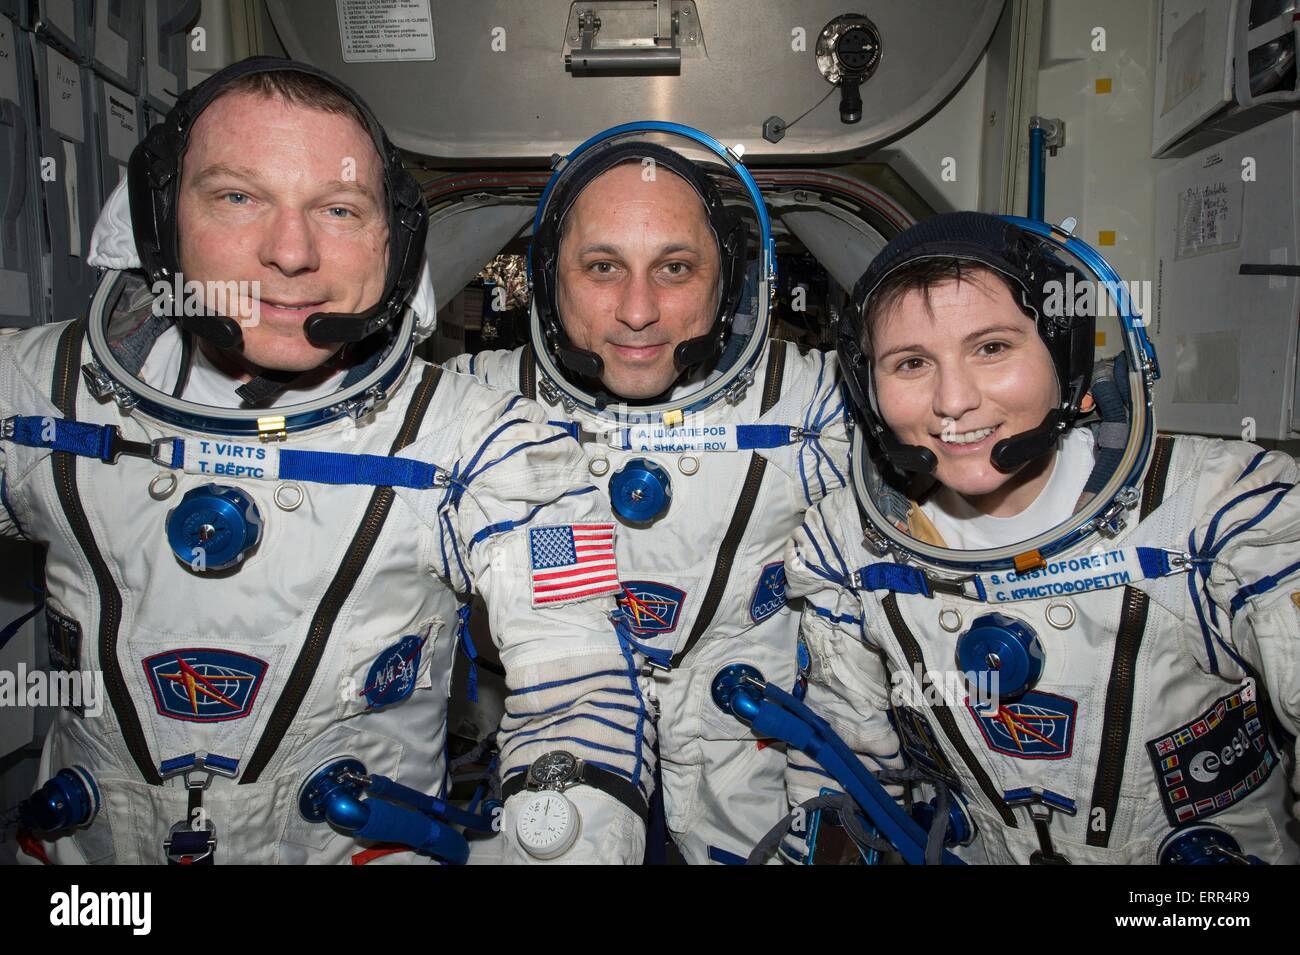 International Space Station Expedition 42 Flight Engineer Samantha Cristoforetti of the European Space Agency with fellow NASA astronaut Terry Virts (left) and Russian cosmonaut Anton Shkaplerov as they perform a checkout of their Russian Soyuz spacesuits in preparation for the journey back to Earth May 6, 2015 in Earth Orbit. Stock Photo